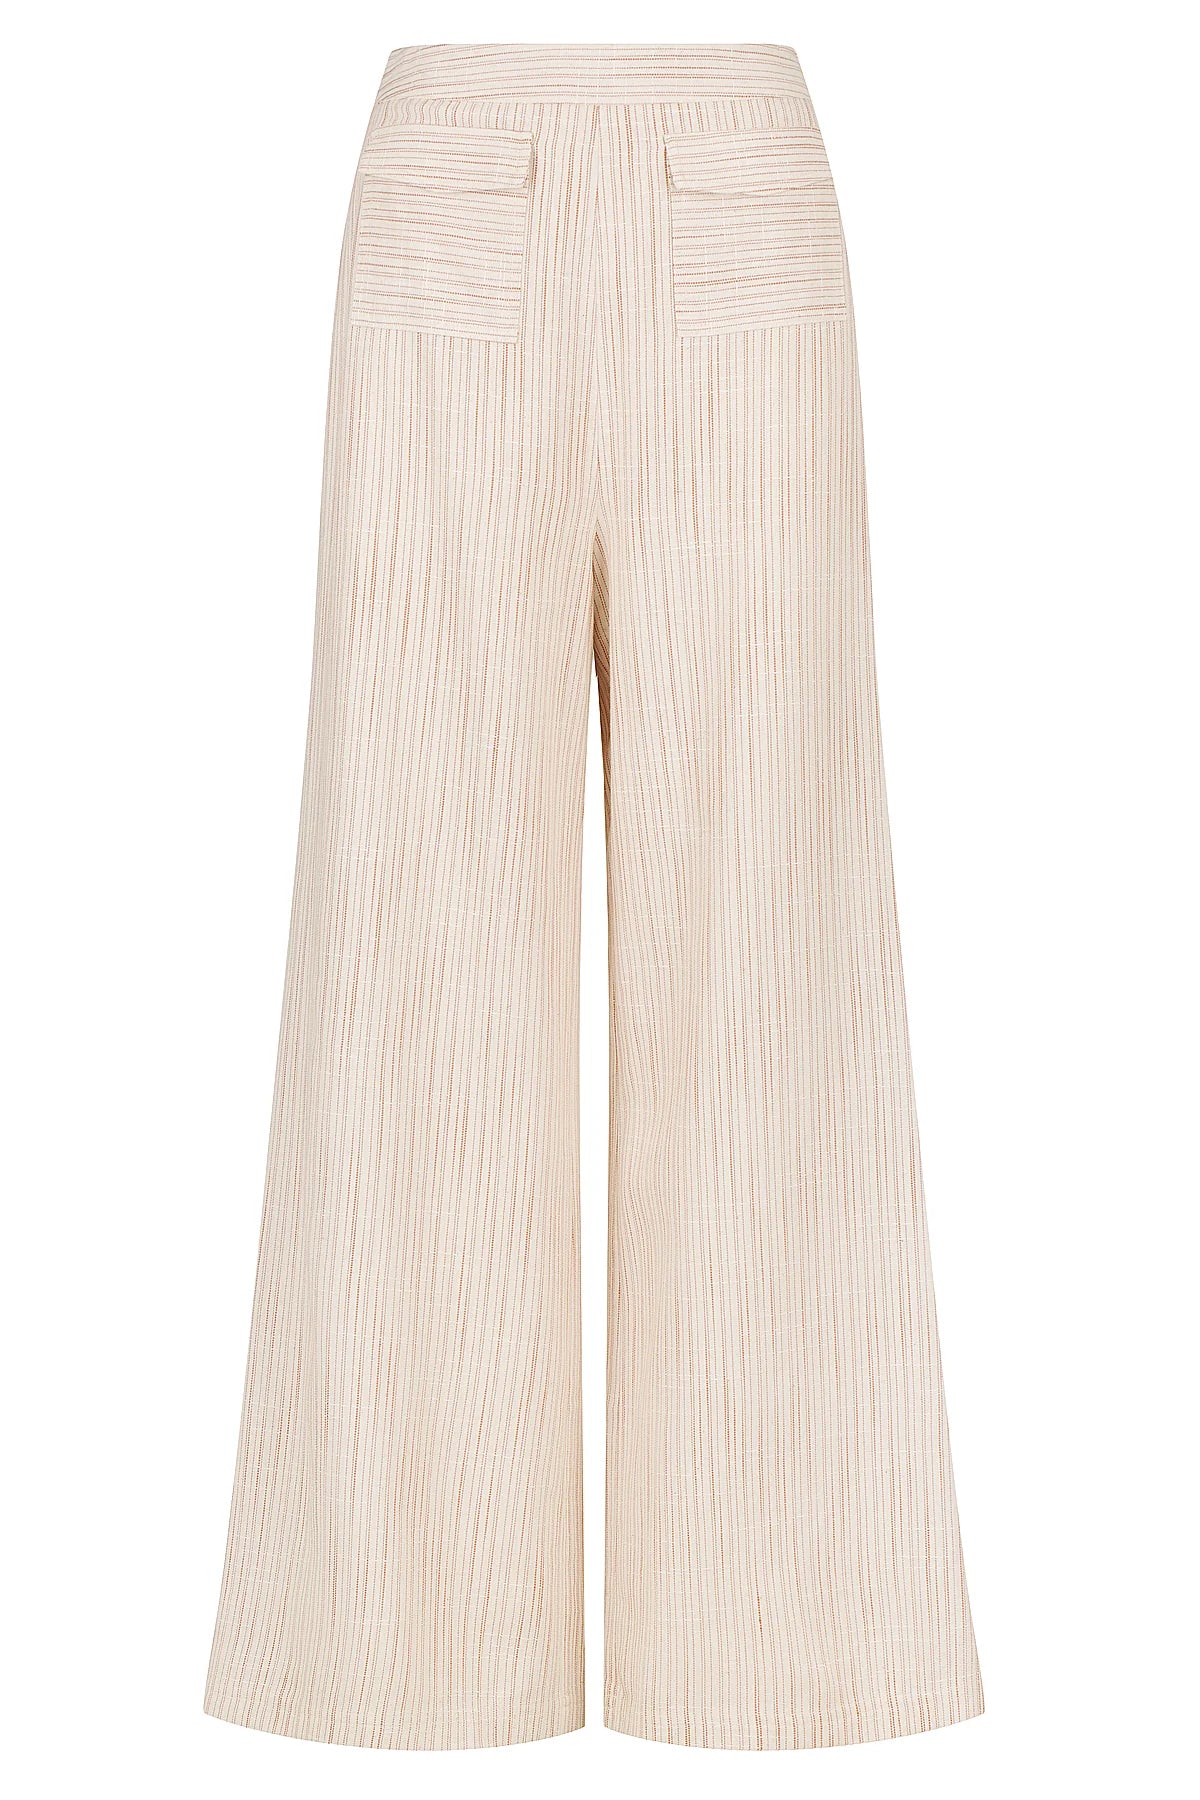 Cream striped linen wide leg trousers with two front patch pockets